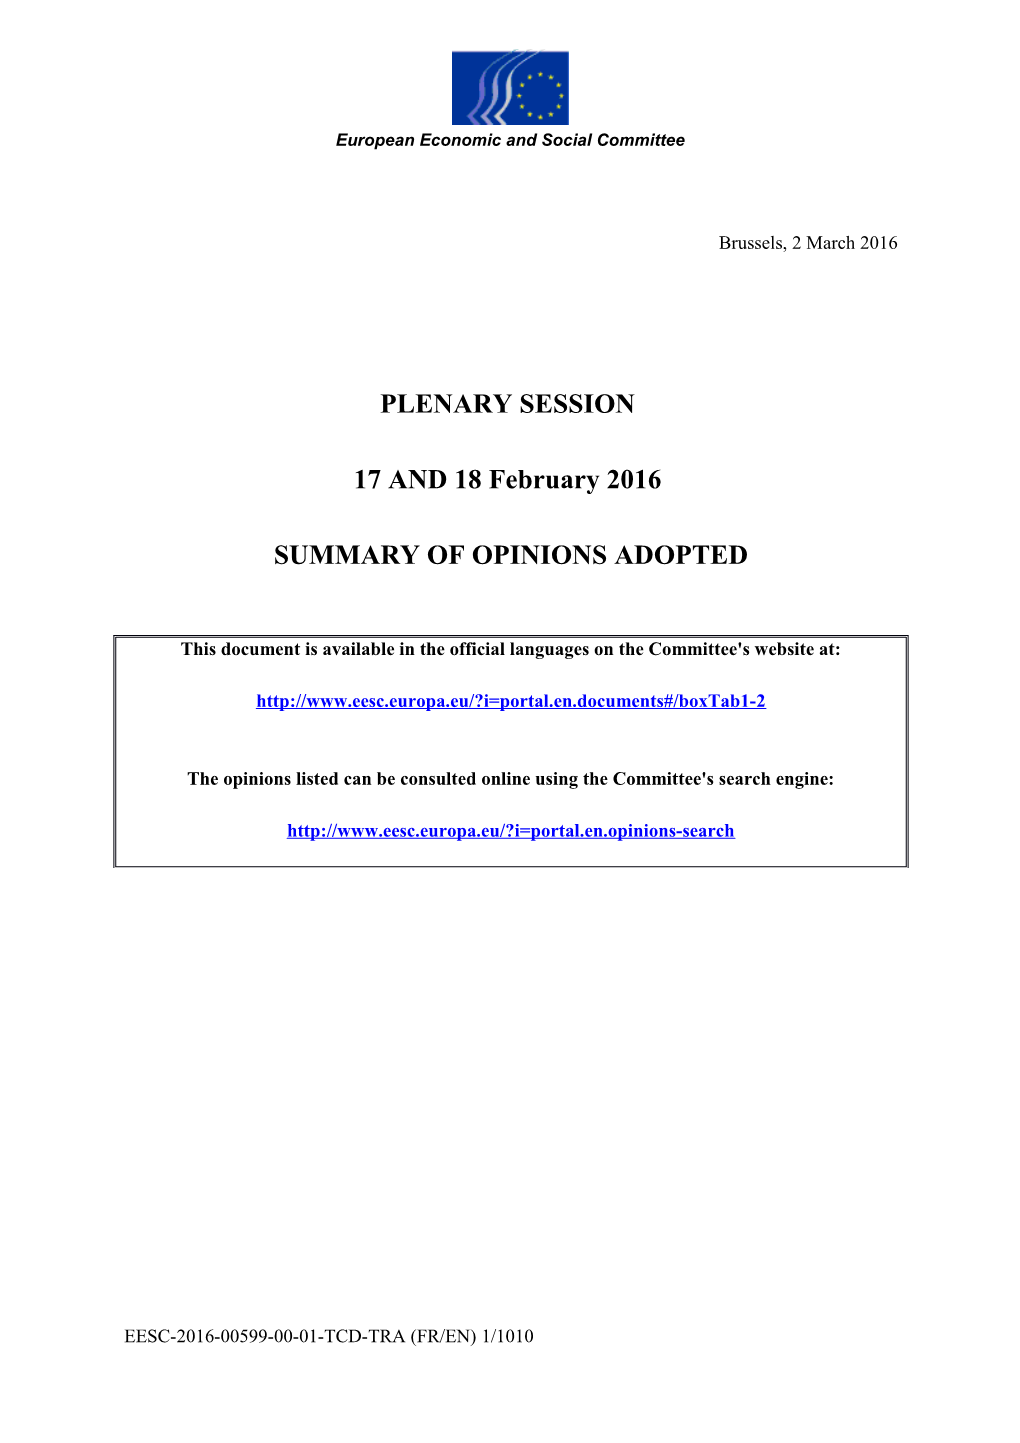 Summary of Opinions Adopted - 514Th Plenary Session - 17 and 18 February 2016